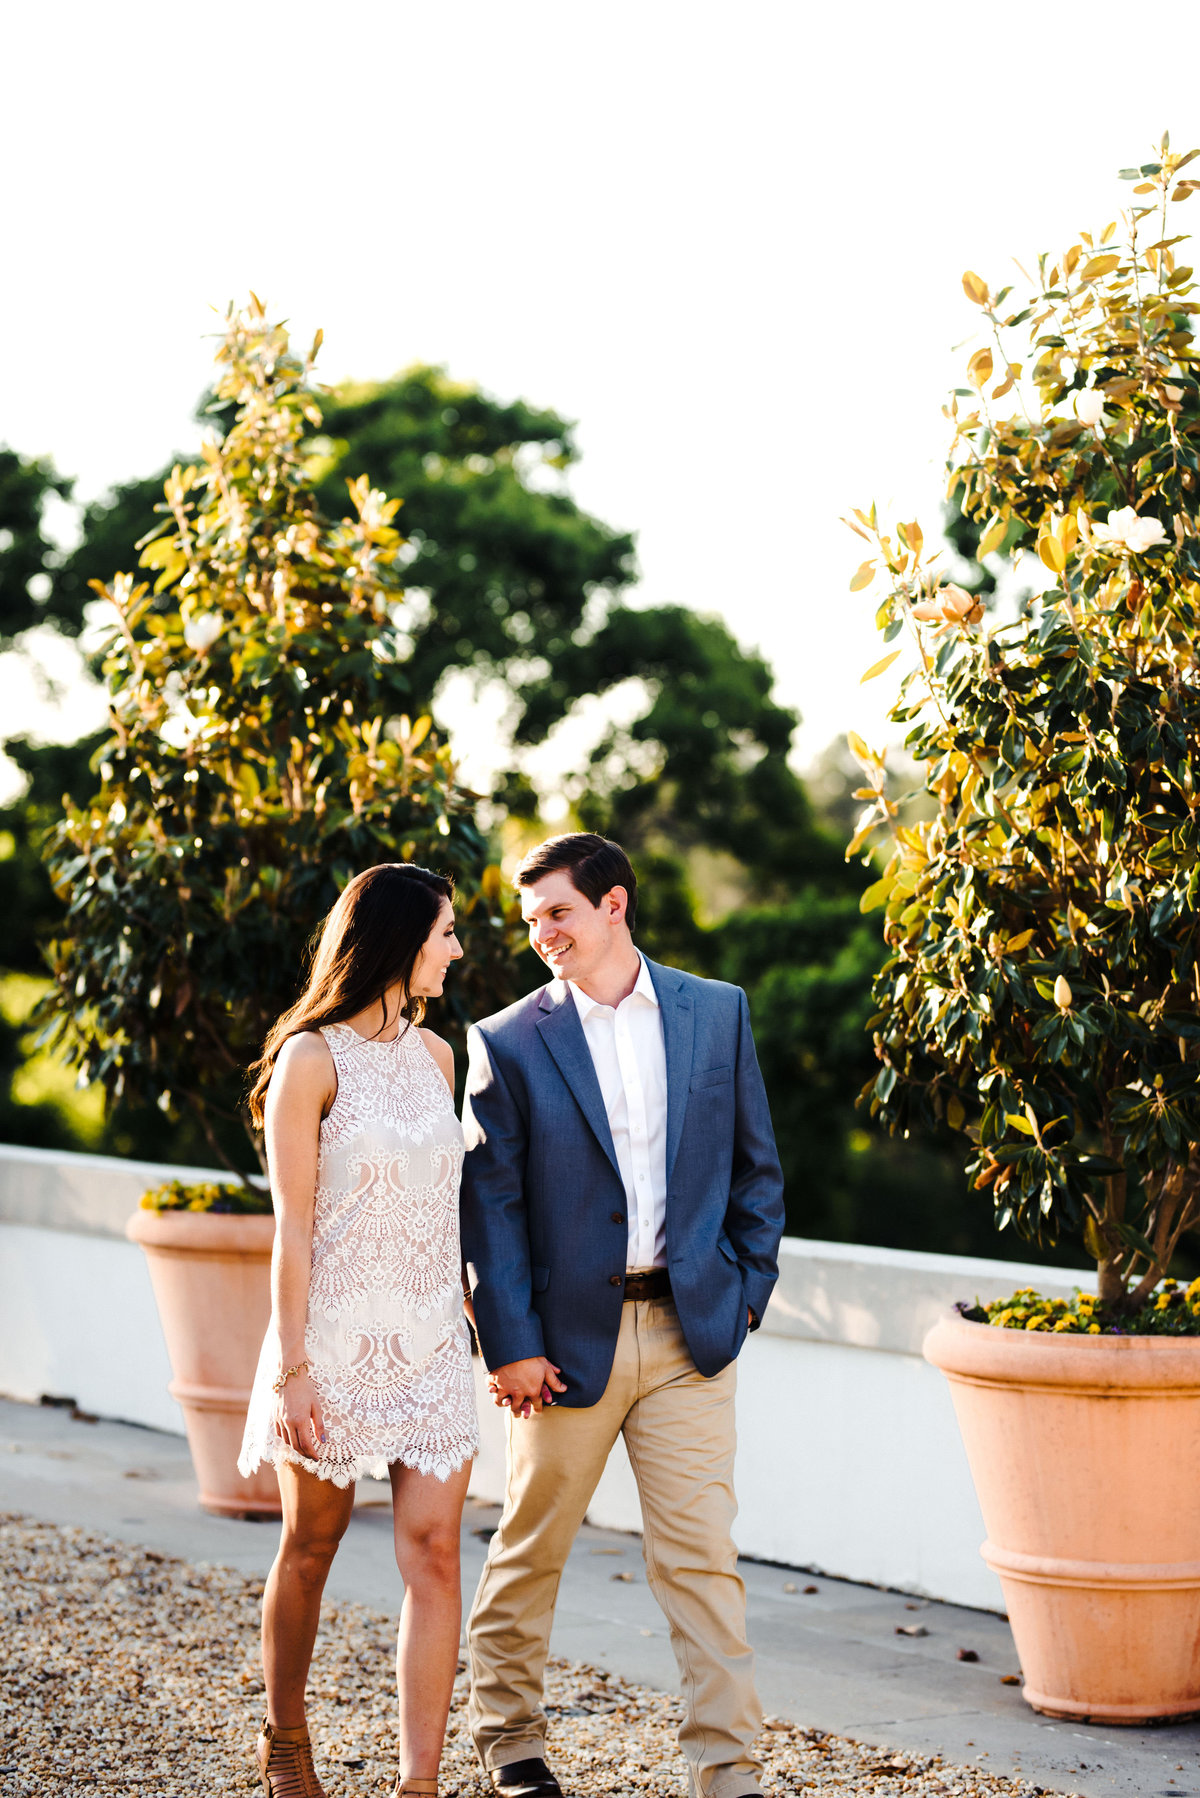 Hills and Dales Estate Engagement Session - 59